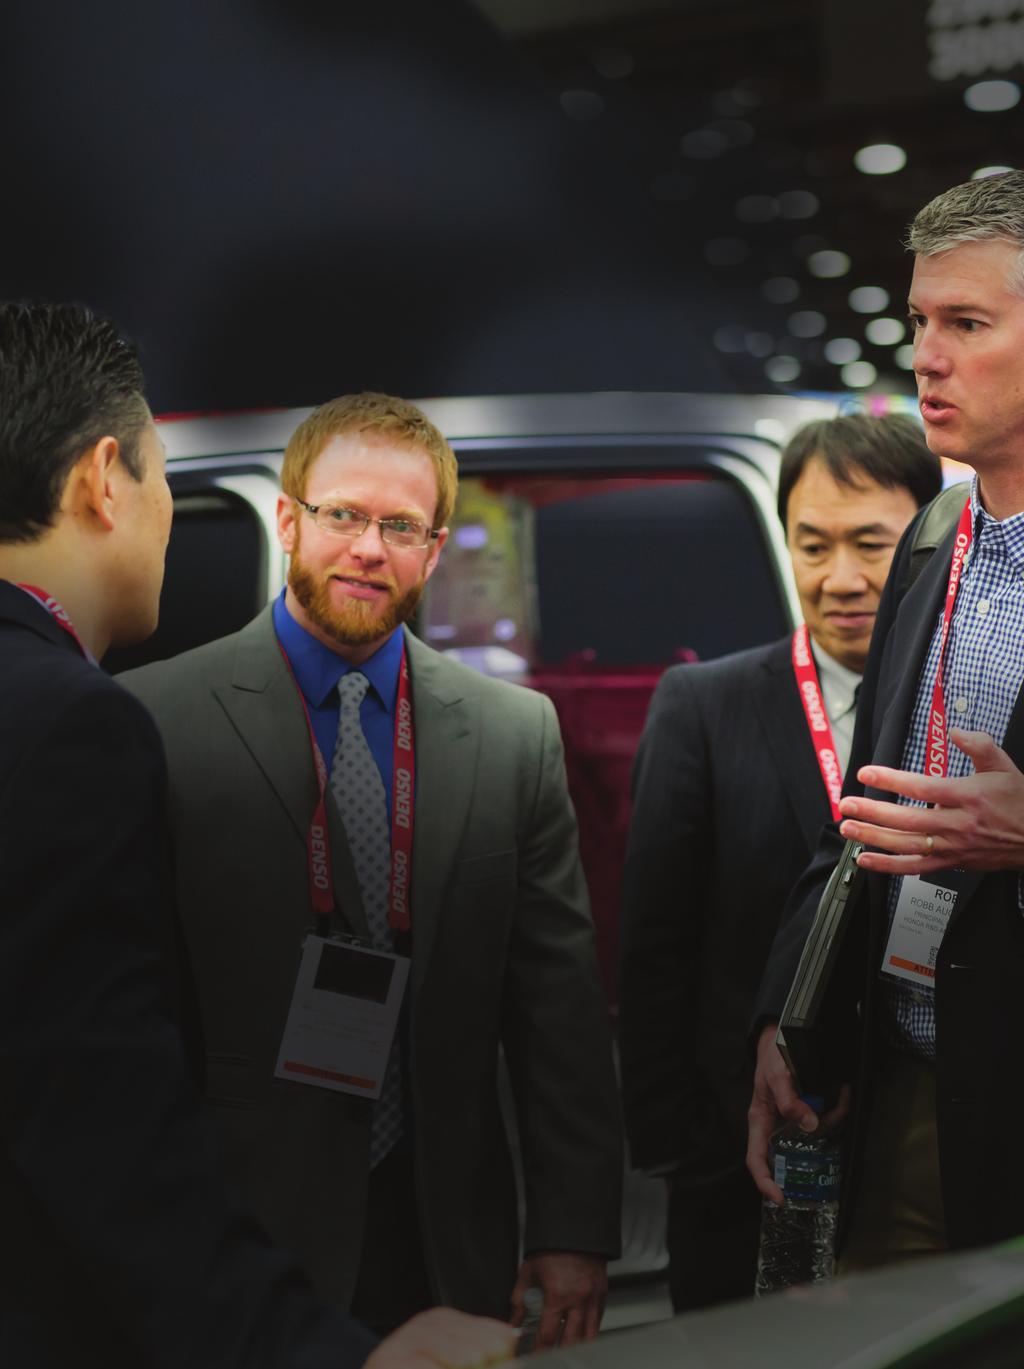 ATTENDEE PROFILE Additive Manufacturing in Motion represents the perfect opportunity to interact and network with other engineers, researchers, and designers from OEMs, suppliers, academia and more.